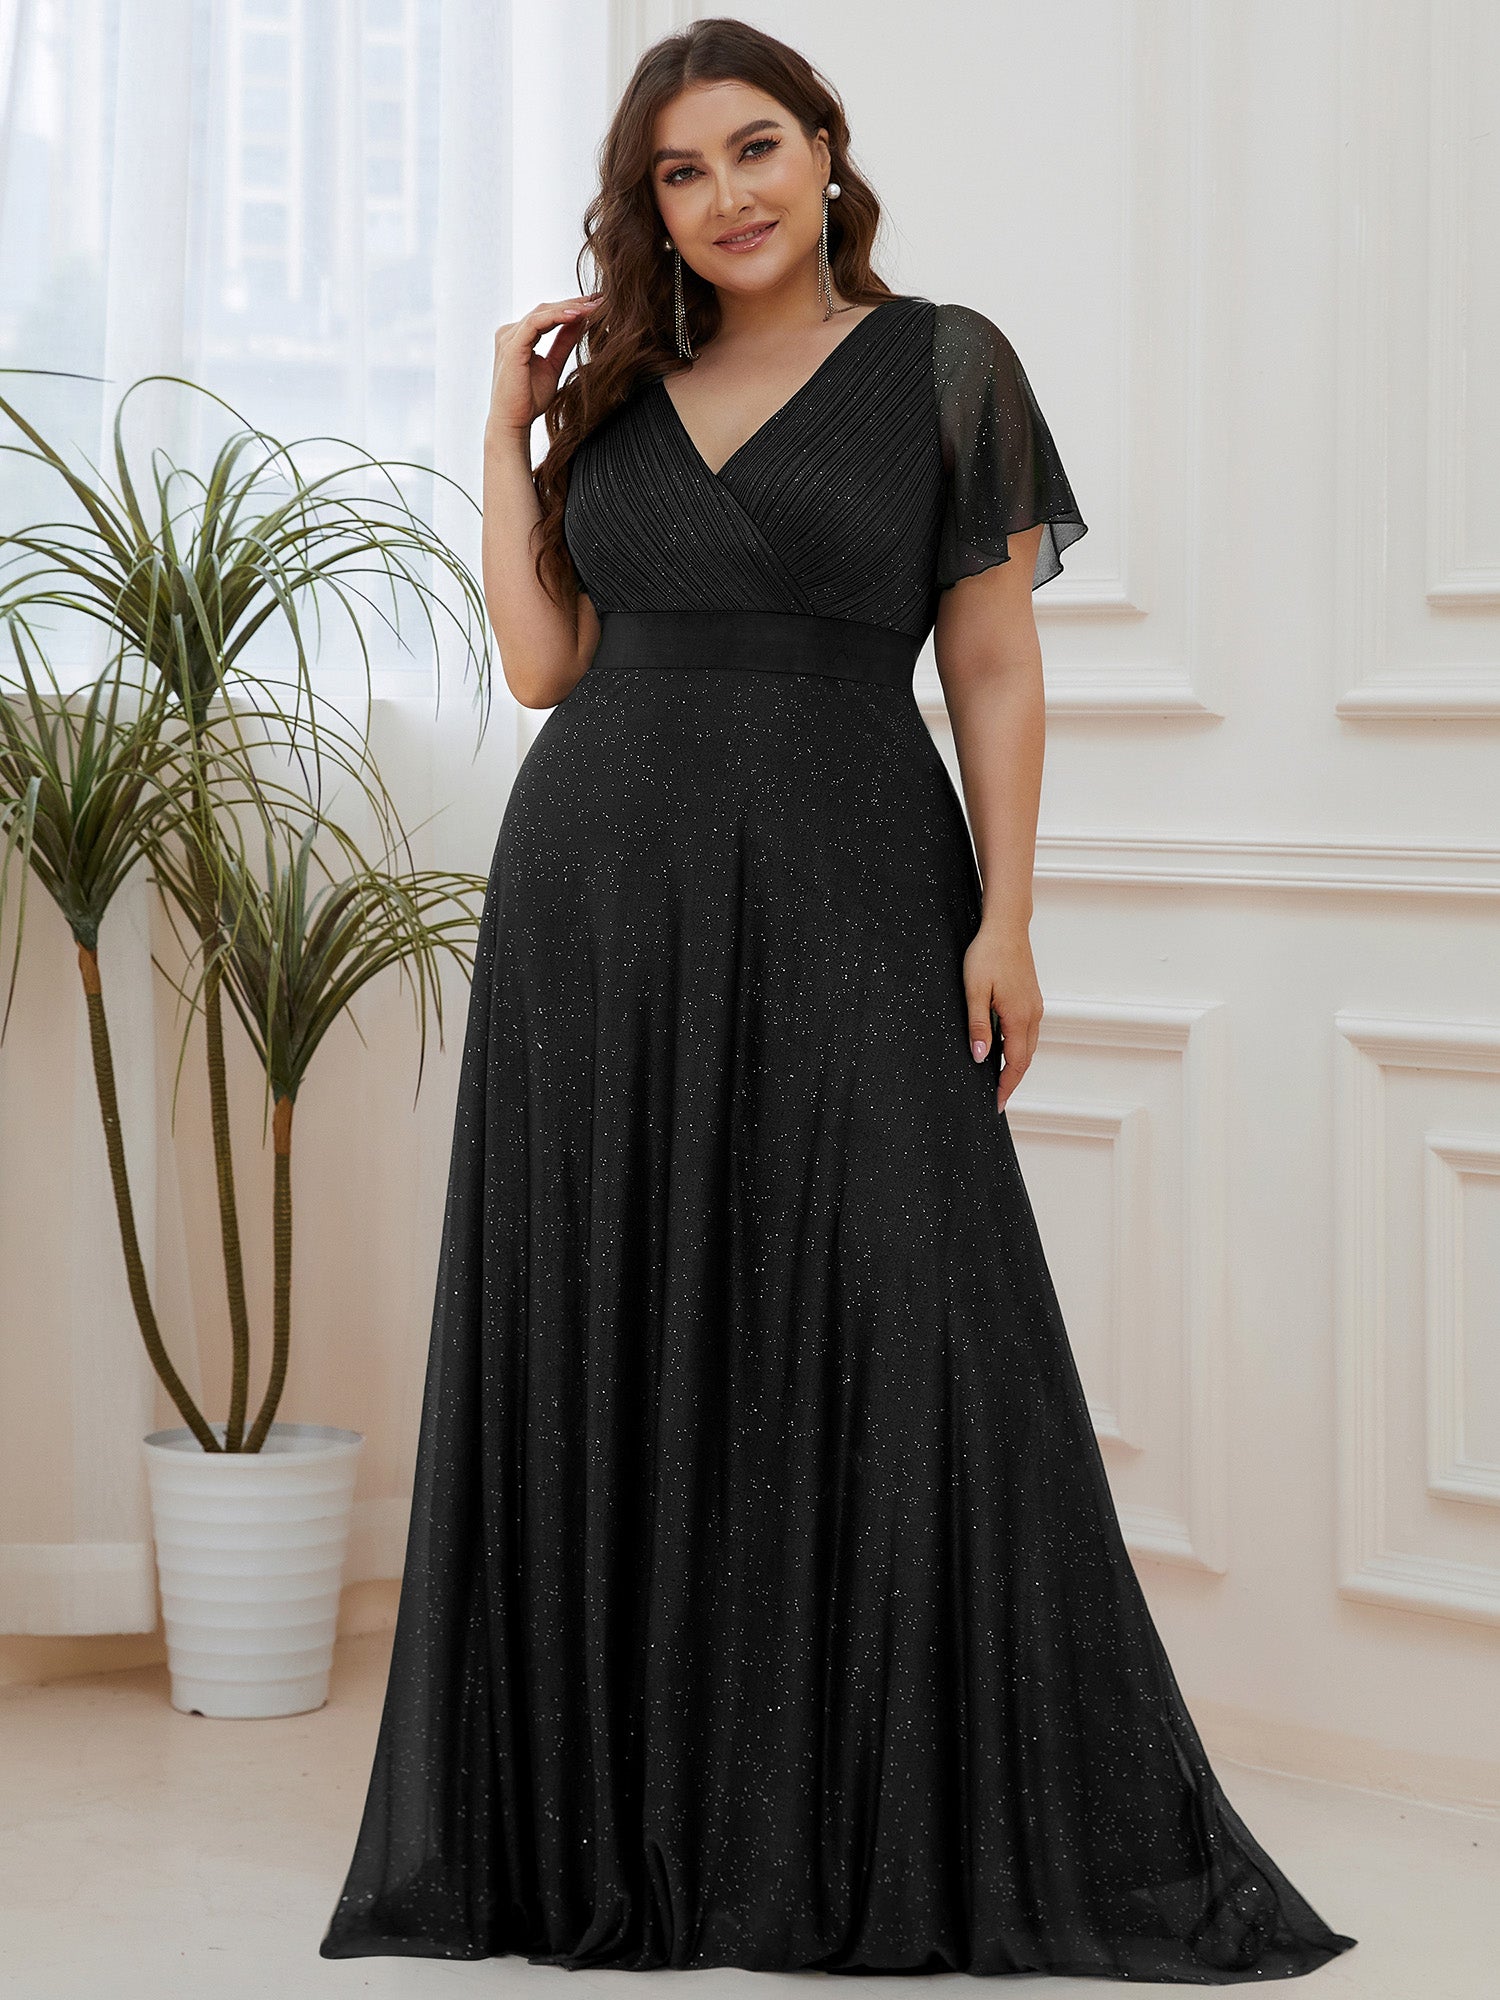 What Are the Most Flattering Black Formal Dresses 2023 on Ever-Pretty?